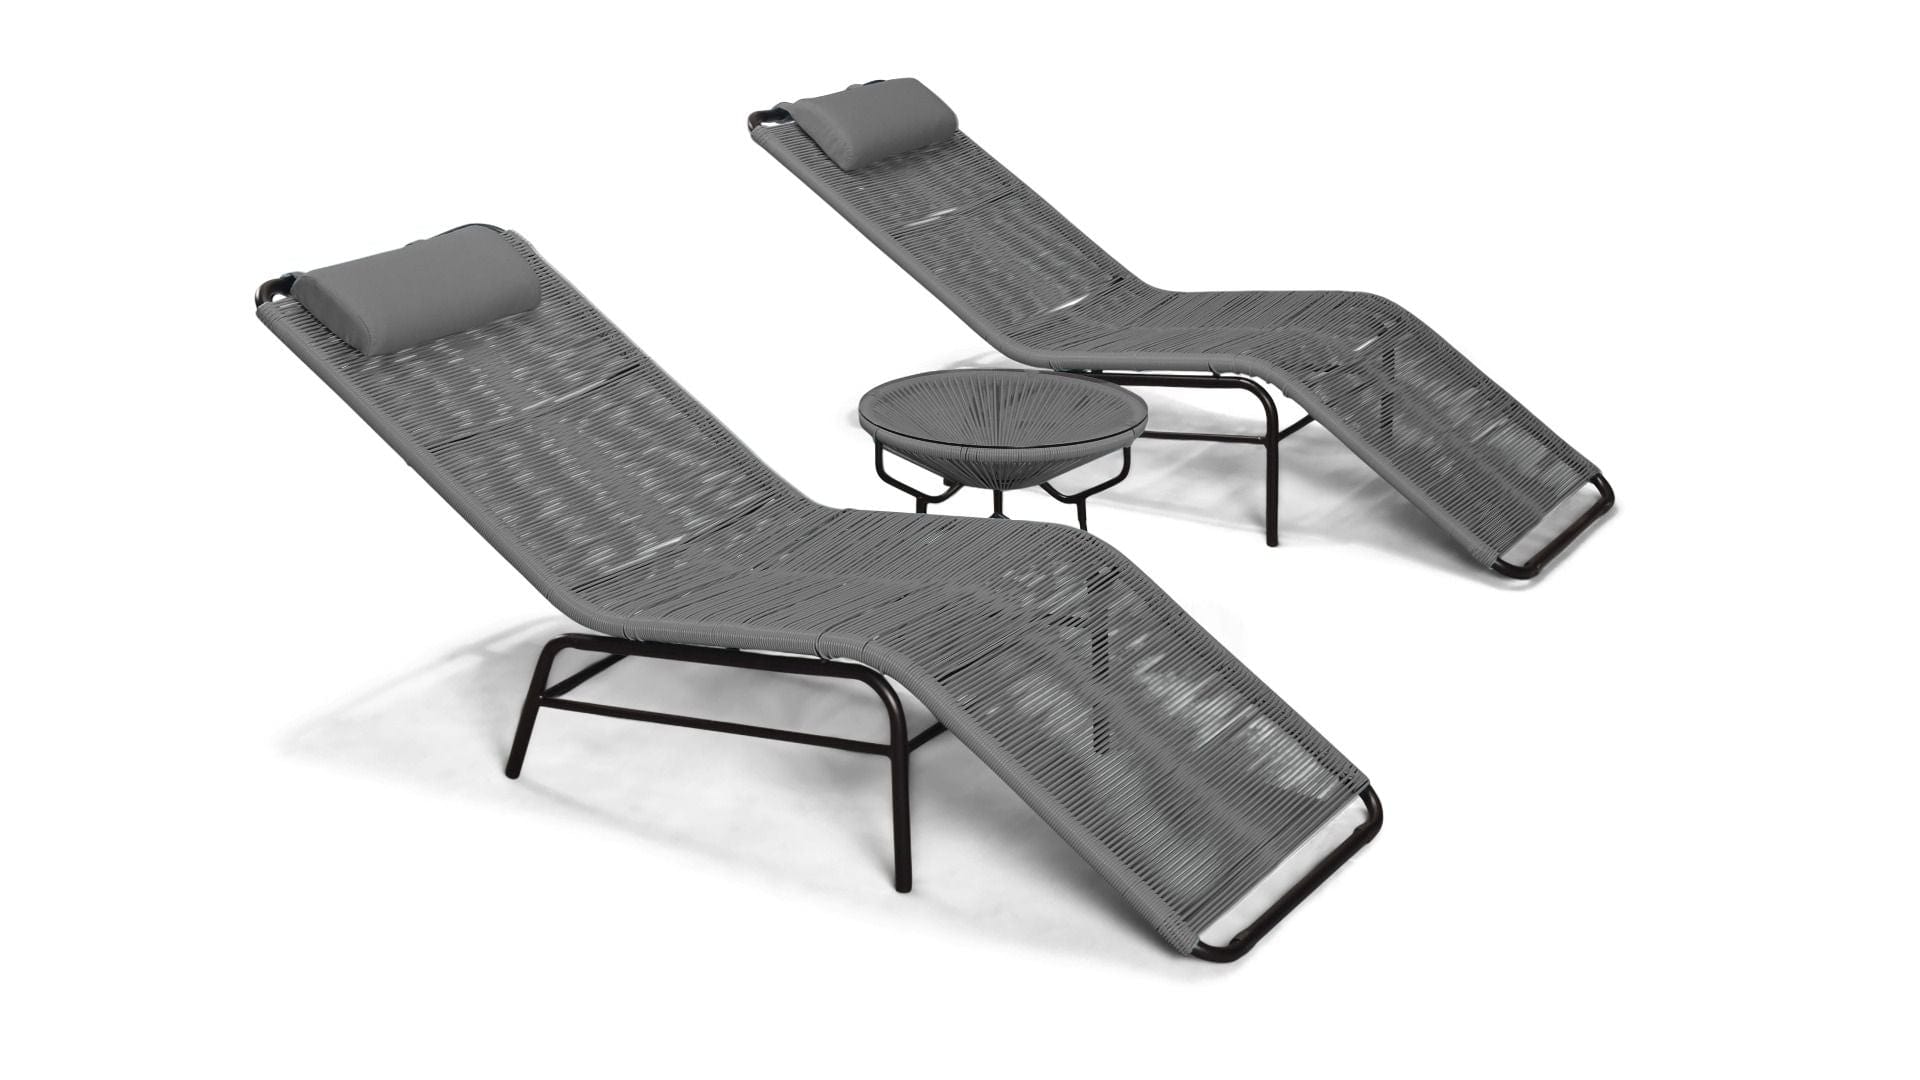 Harmonia Living Chaise Lounge Space Gray Harmonia Living - Acapulco 3 Piece Chaise Lounge Set - Table and Two Chaise Lounges | HL-ACA-3CLS